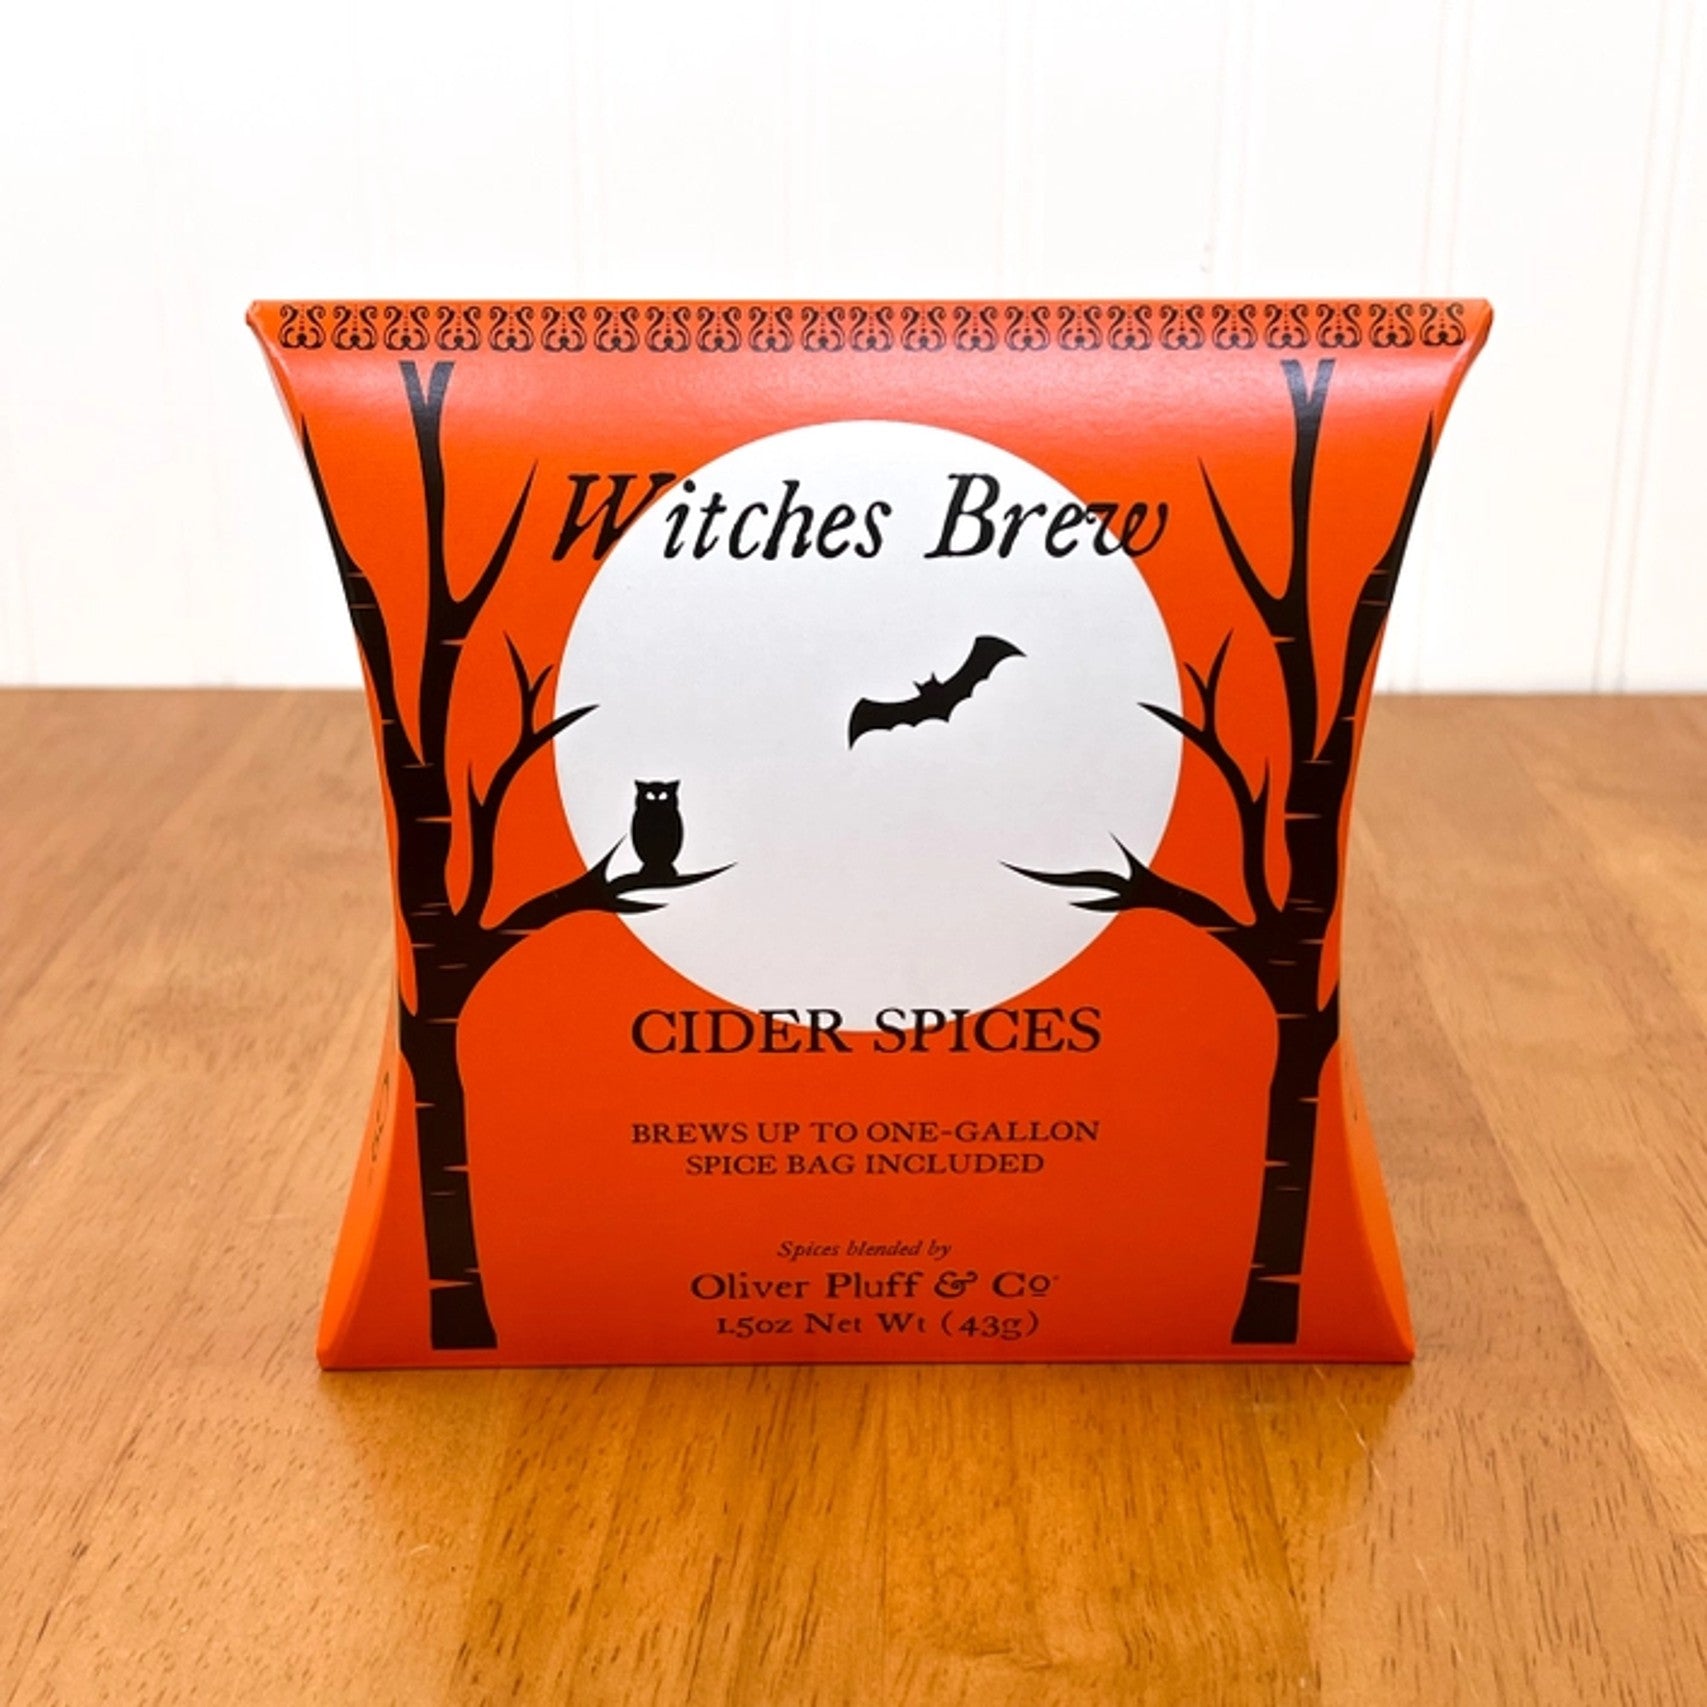 Witches Brew Cider Spices